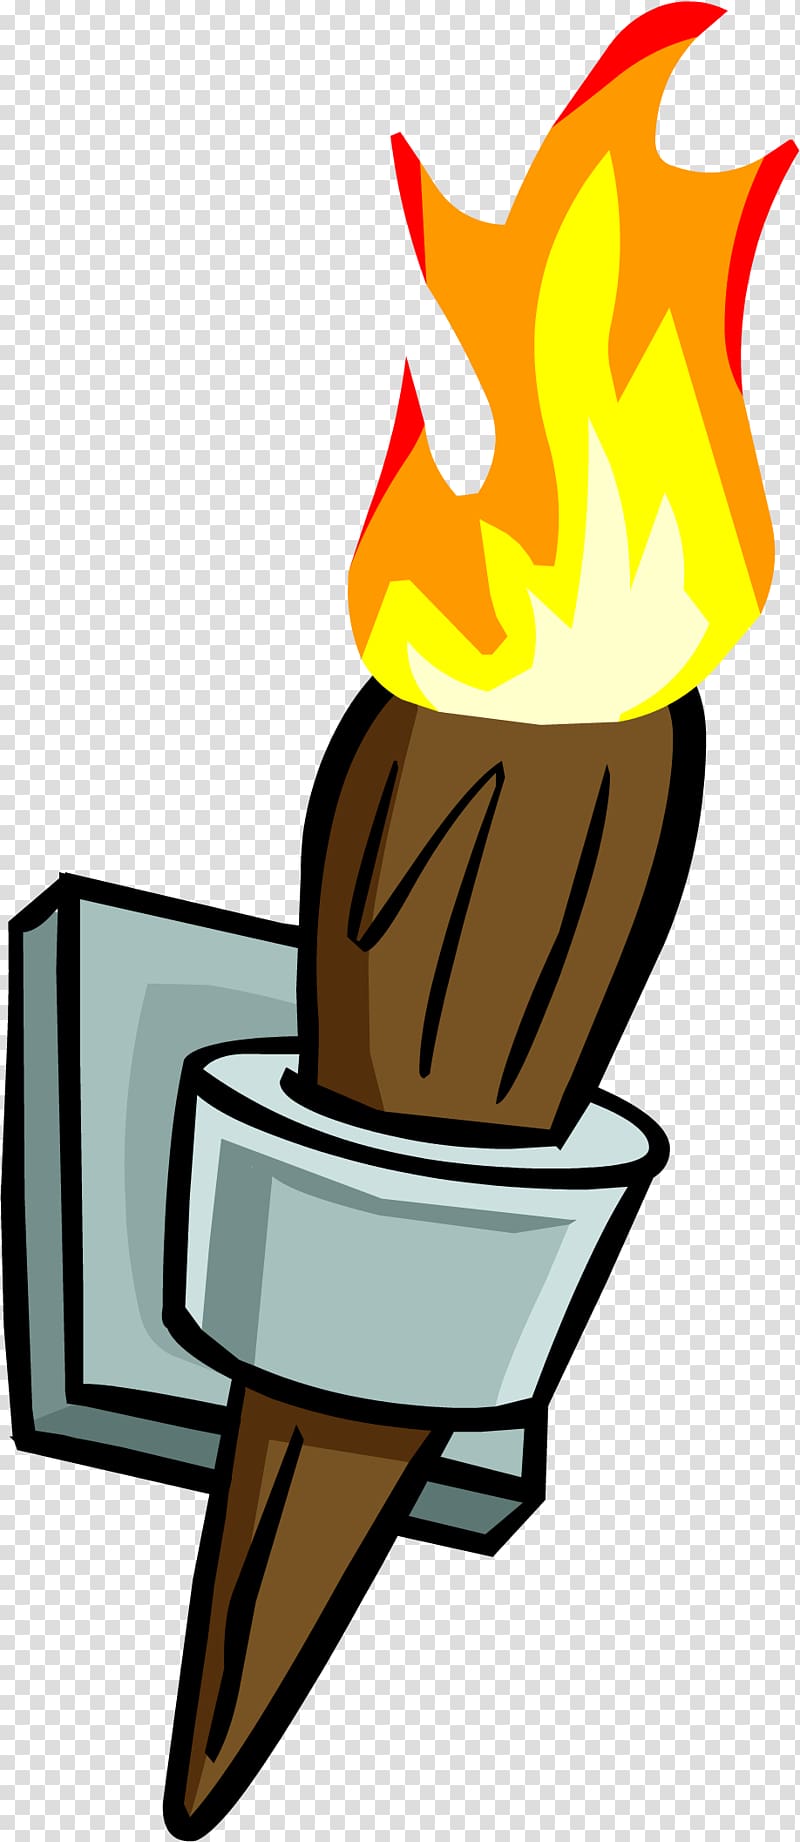 brown torch illustration, Wall Torch transparent background PNG clipart